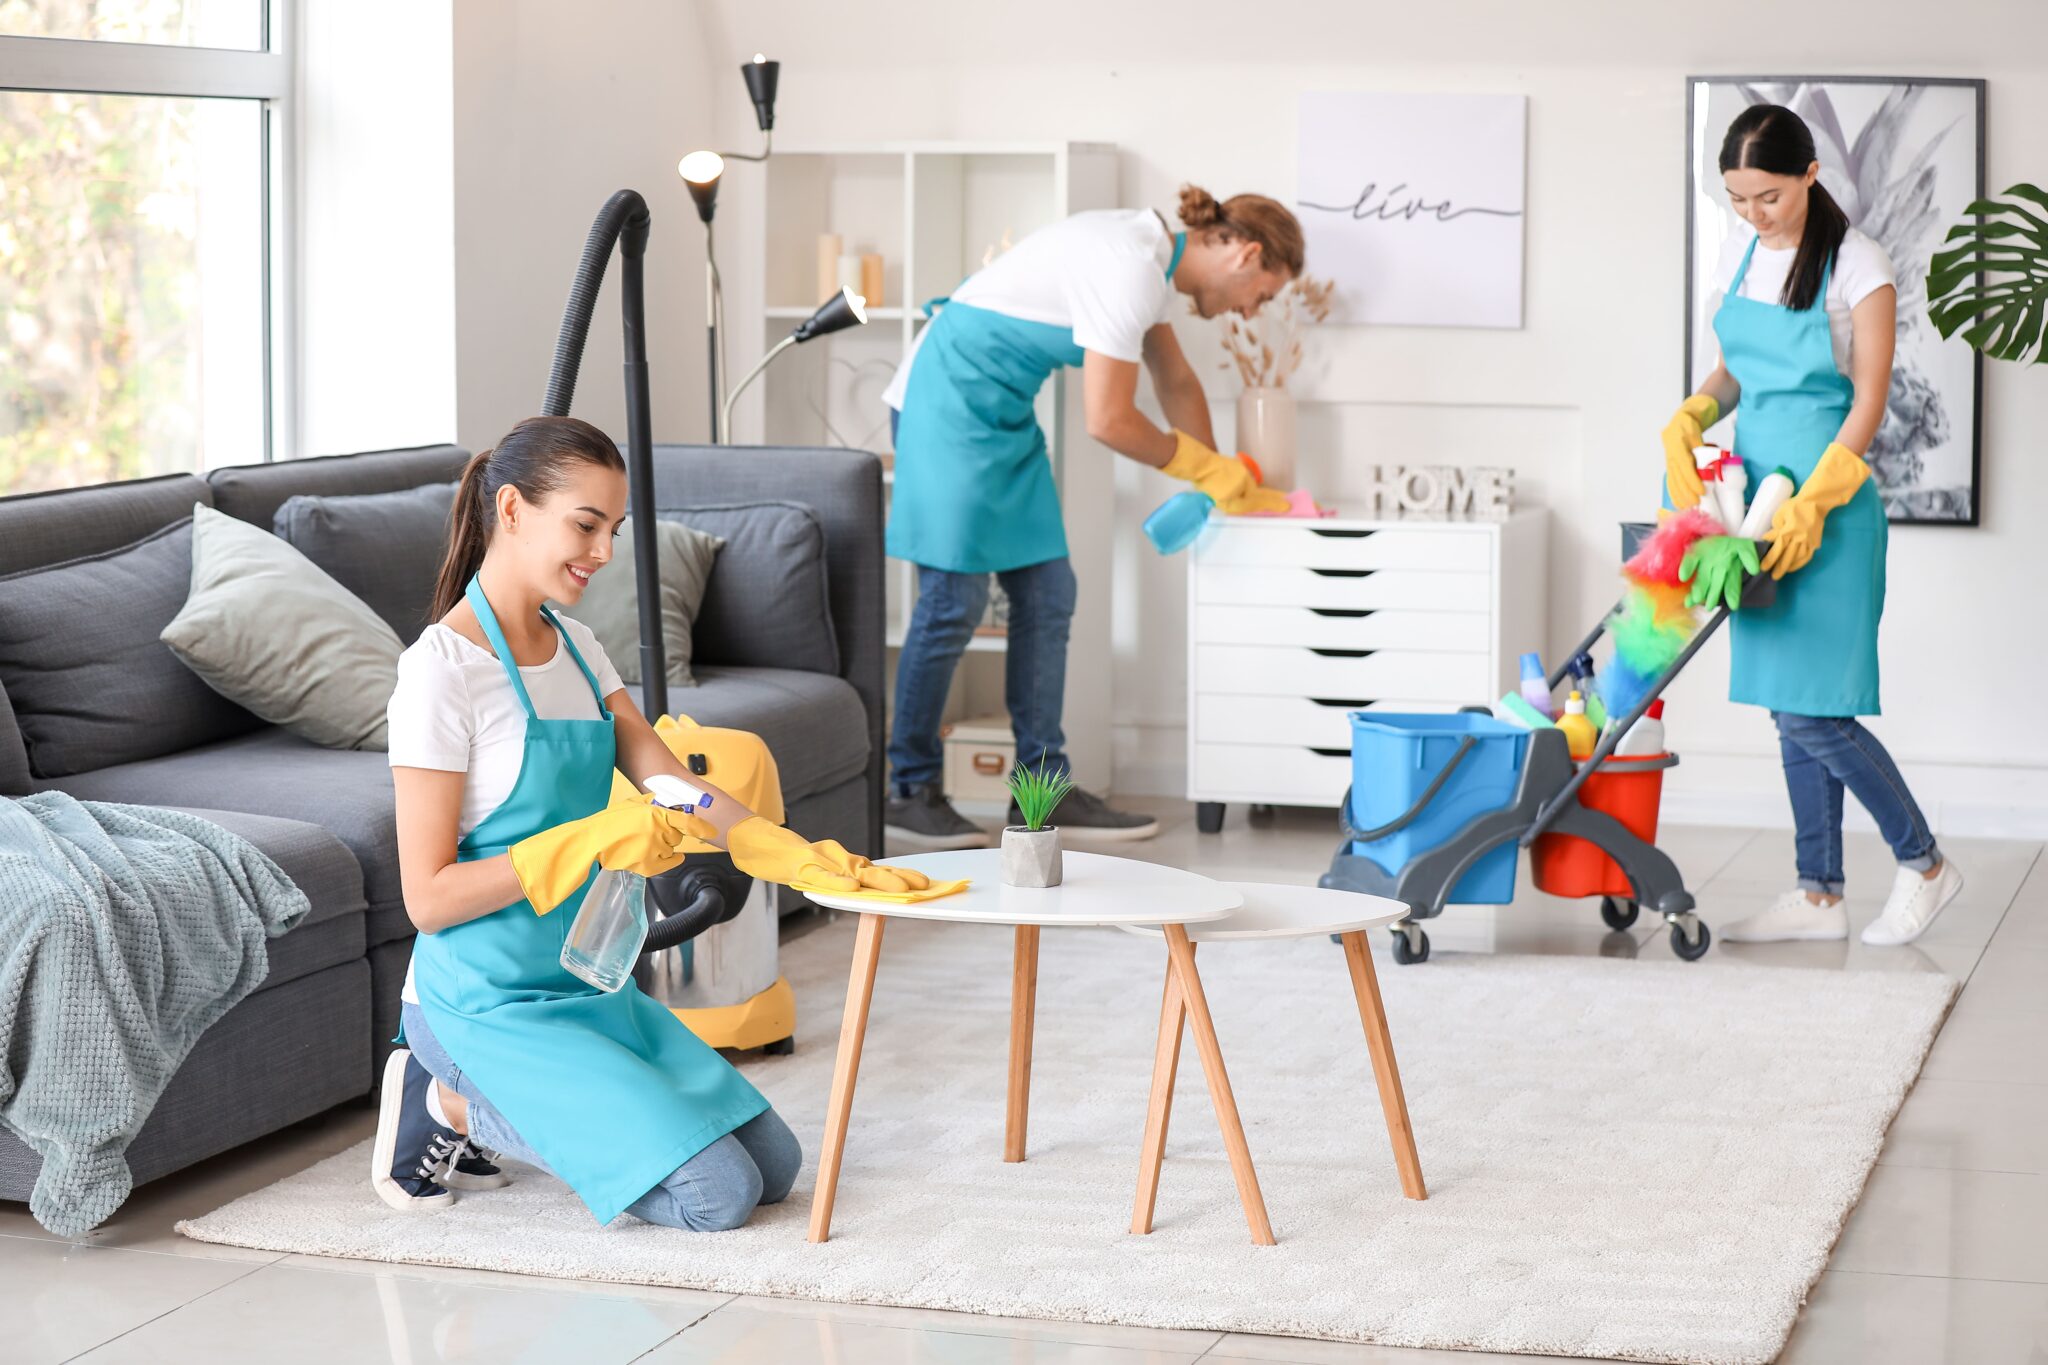 house cleaning service cost in LA, CA